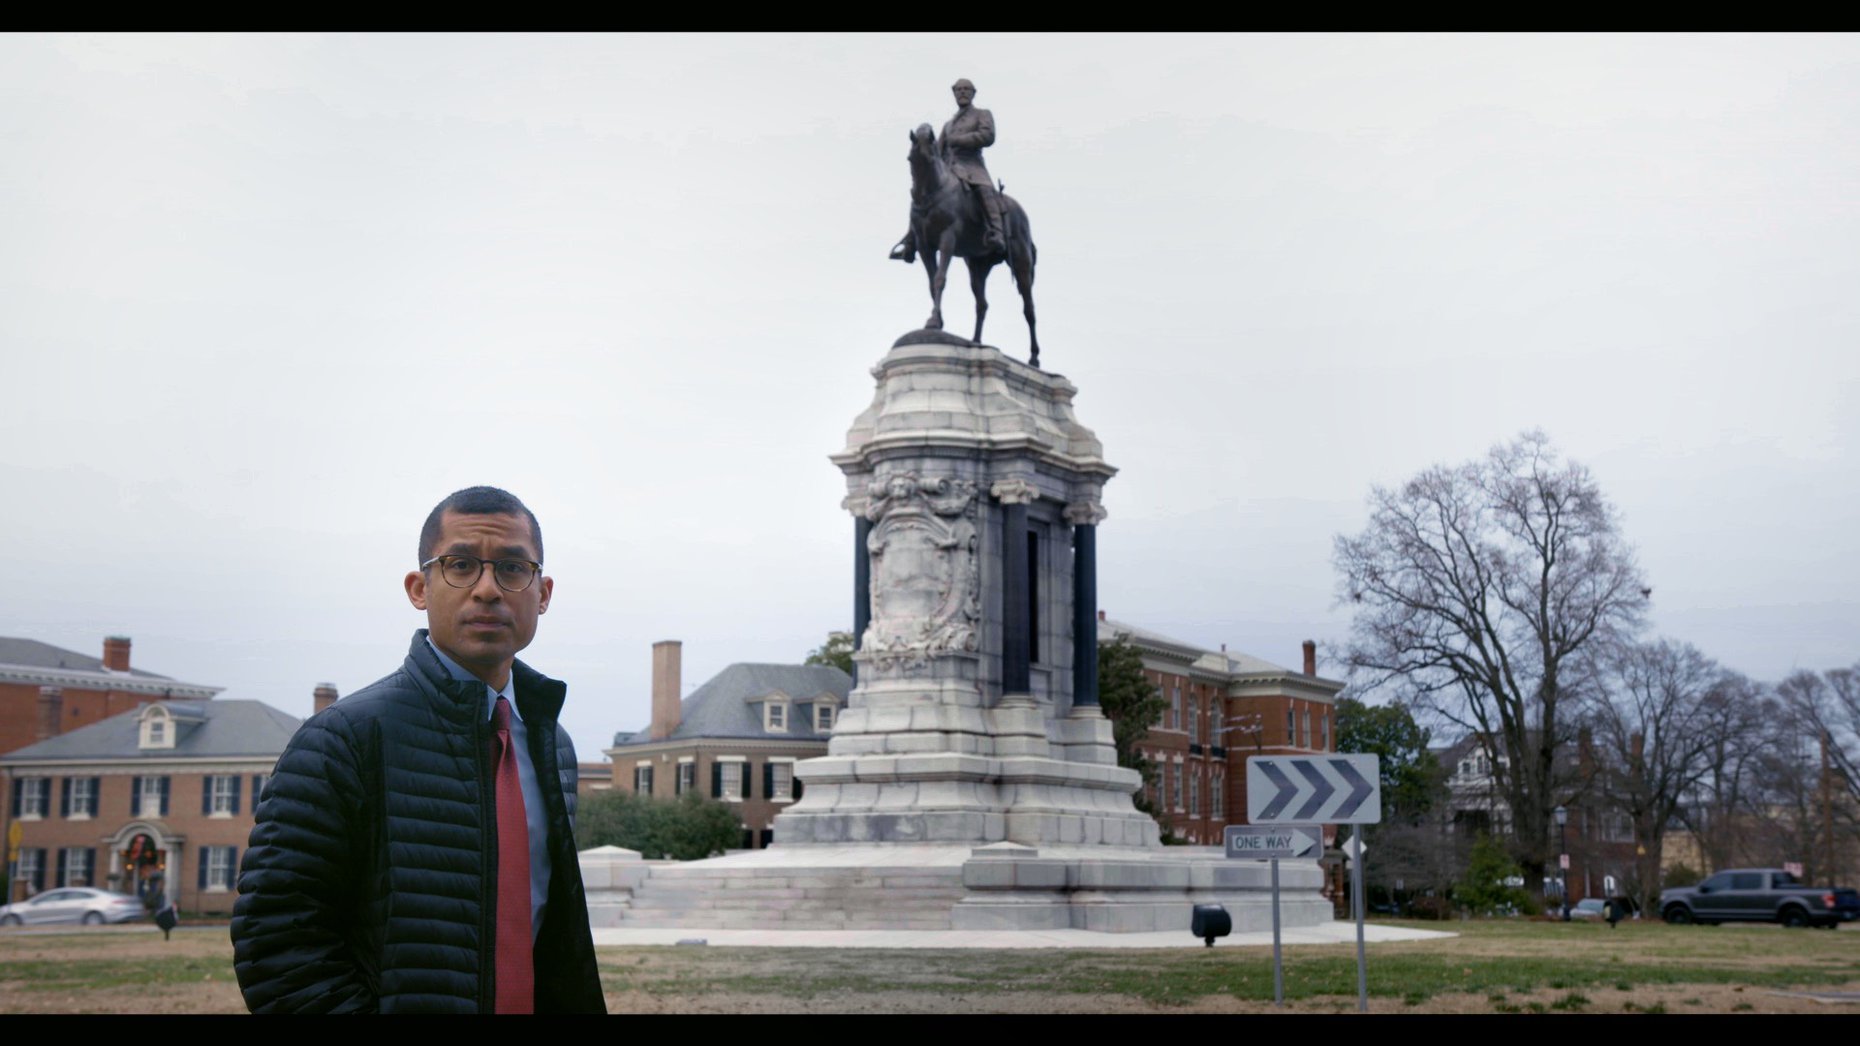 CJ Hunt in front of confederate monument